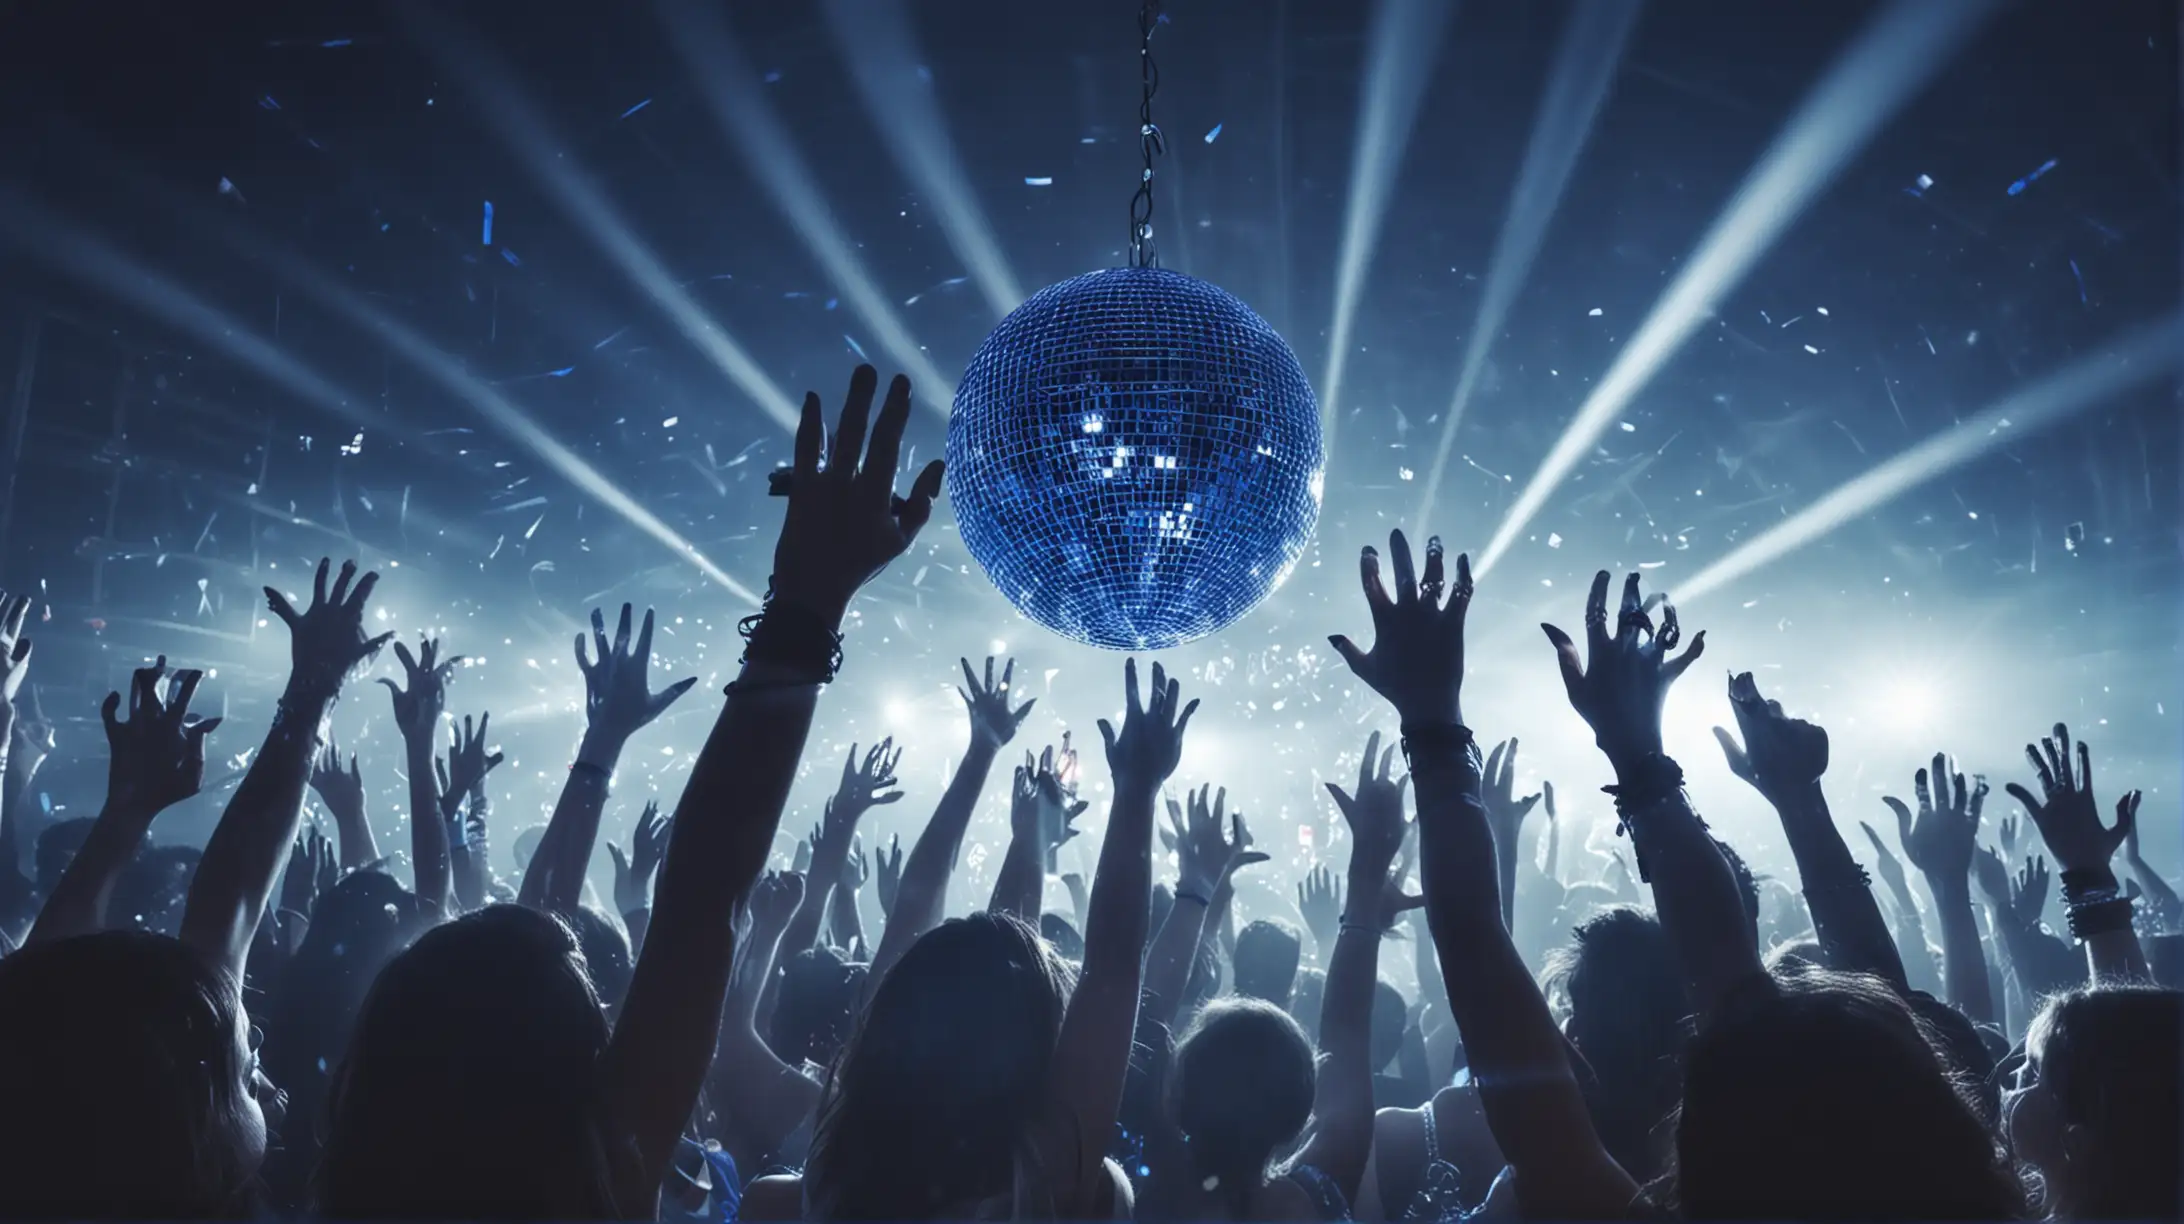 A party of young people, upper body silhouettes, festive atmosphere, blue tone, disco ball high up